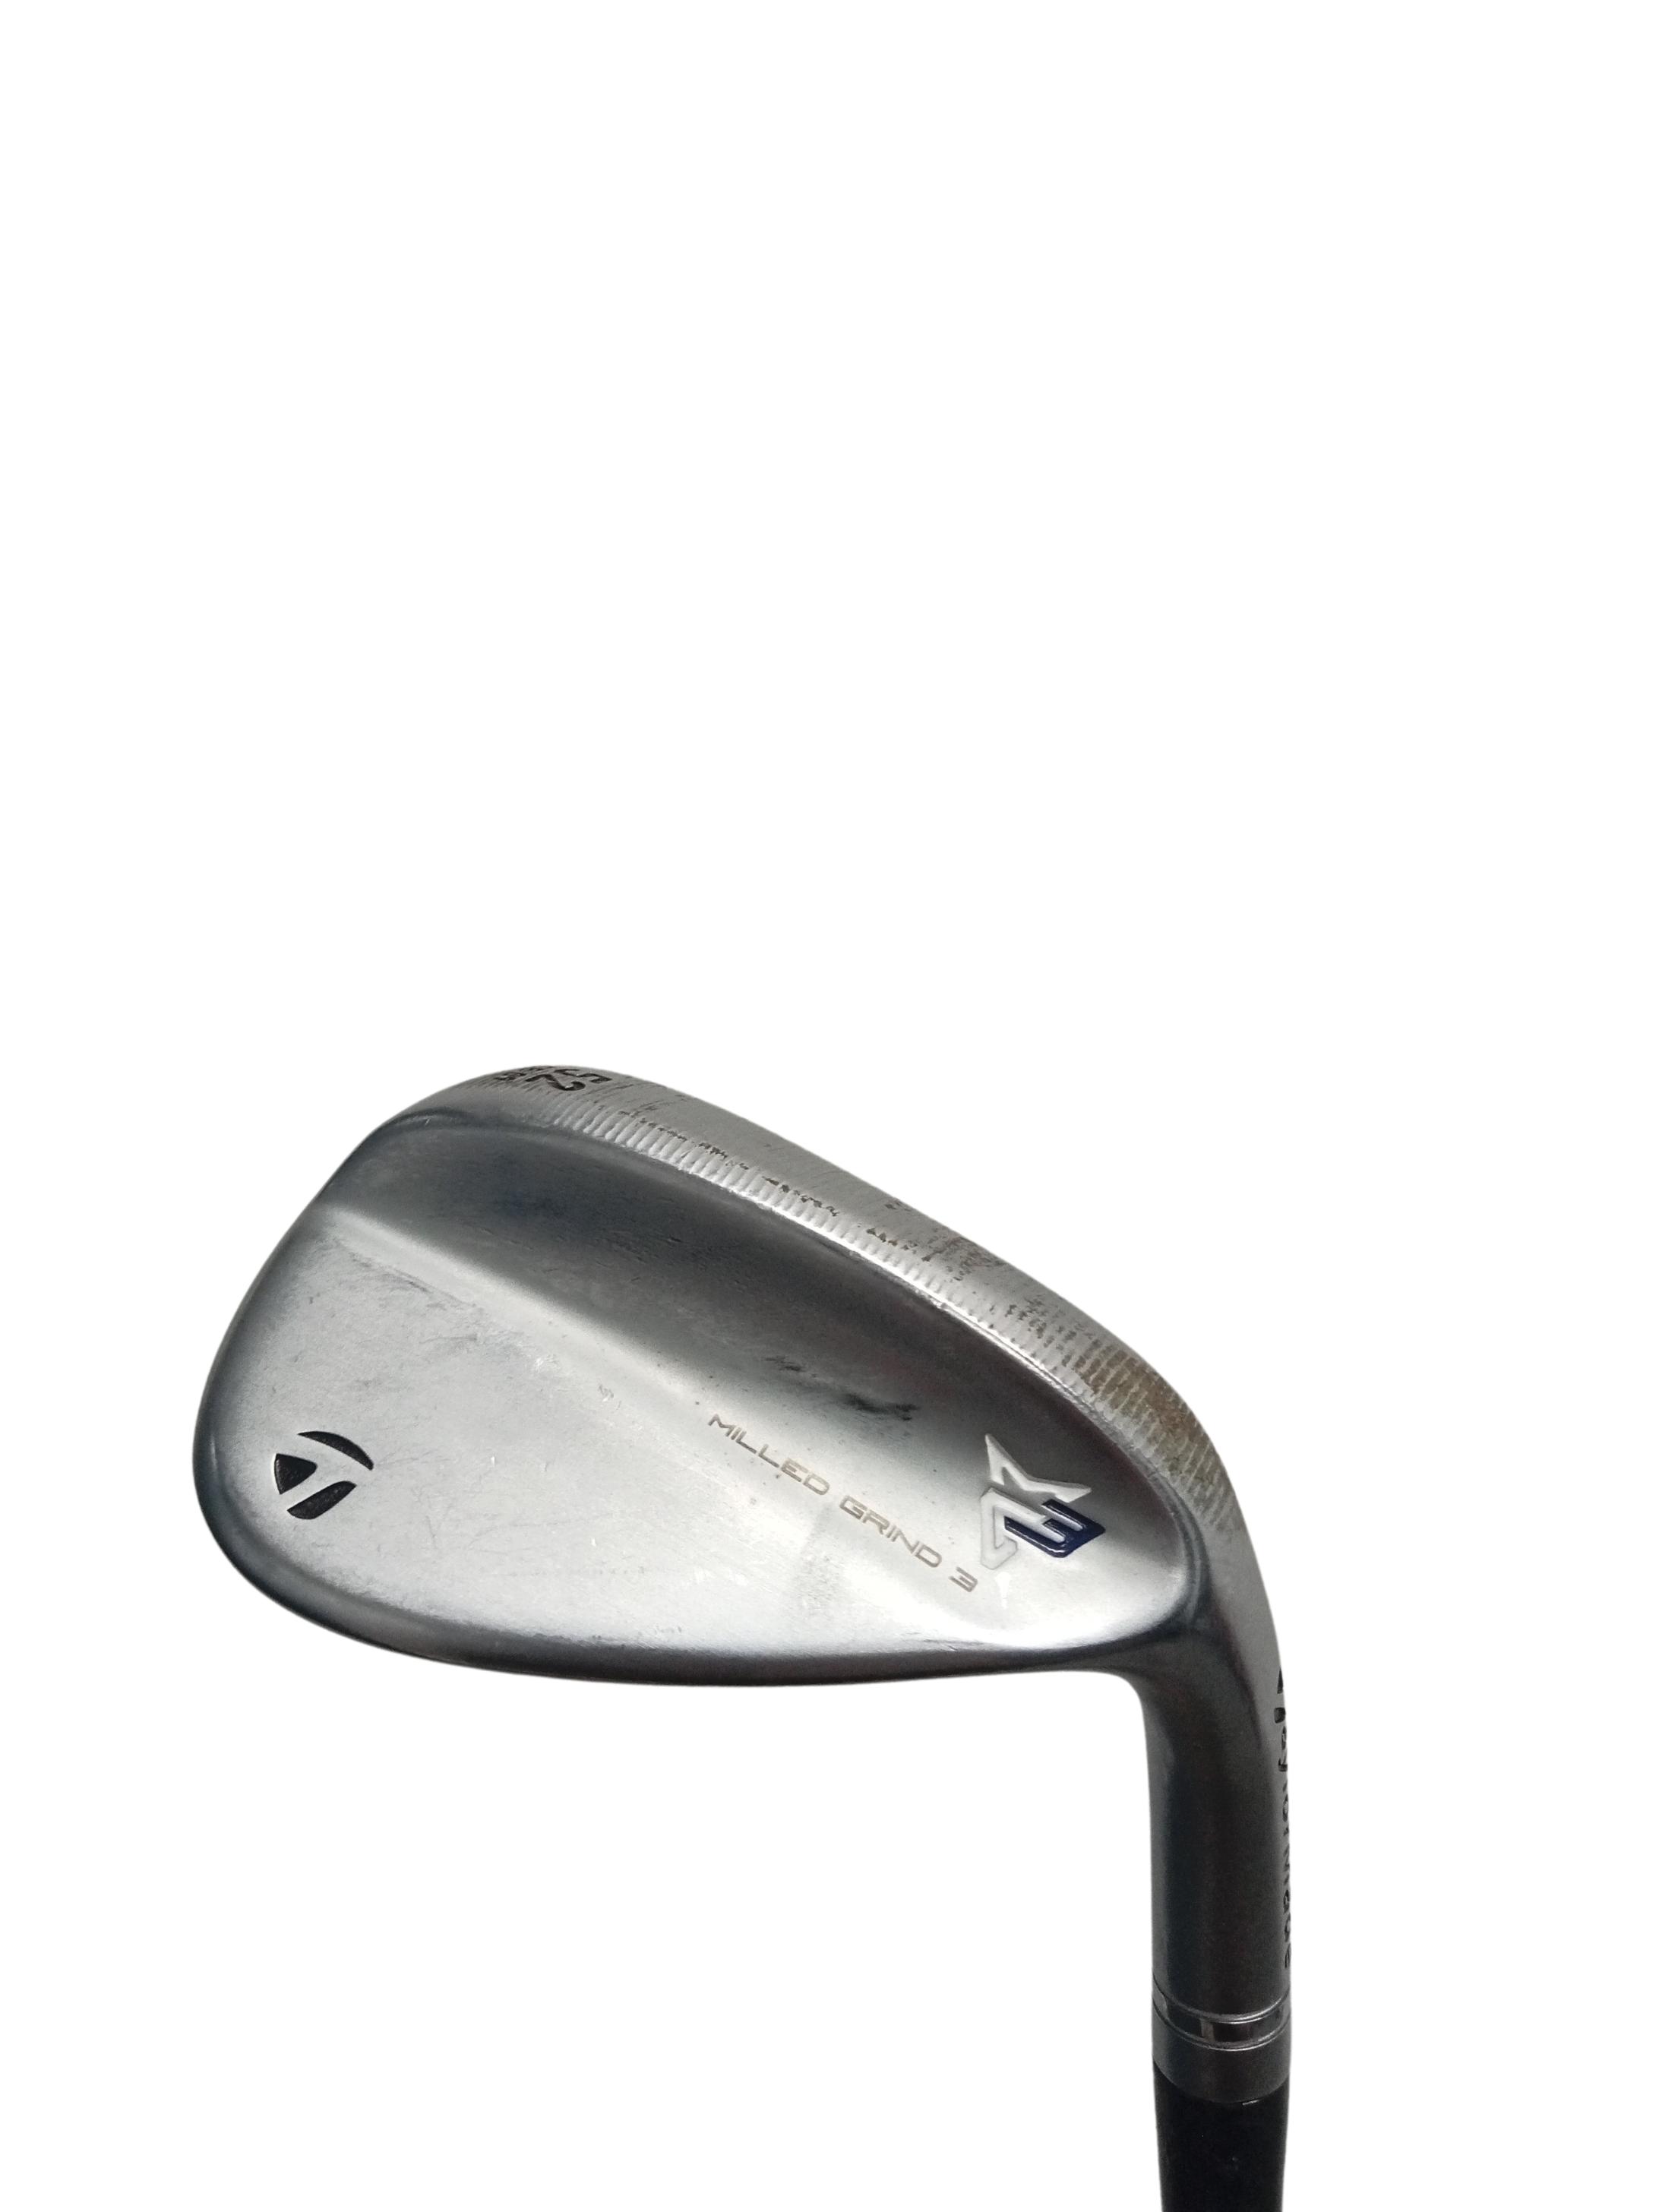 Pre-owned TaylorMade MG3 52 Men's Wedge